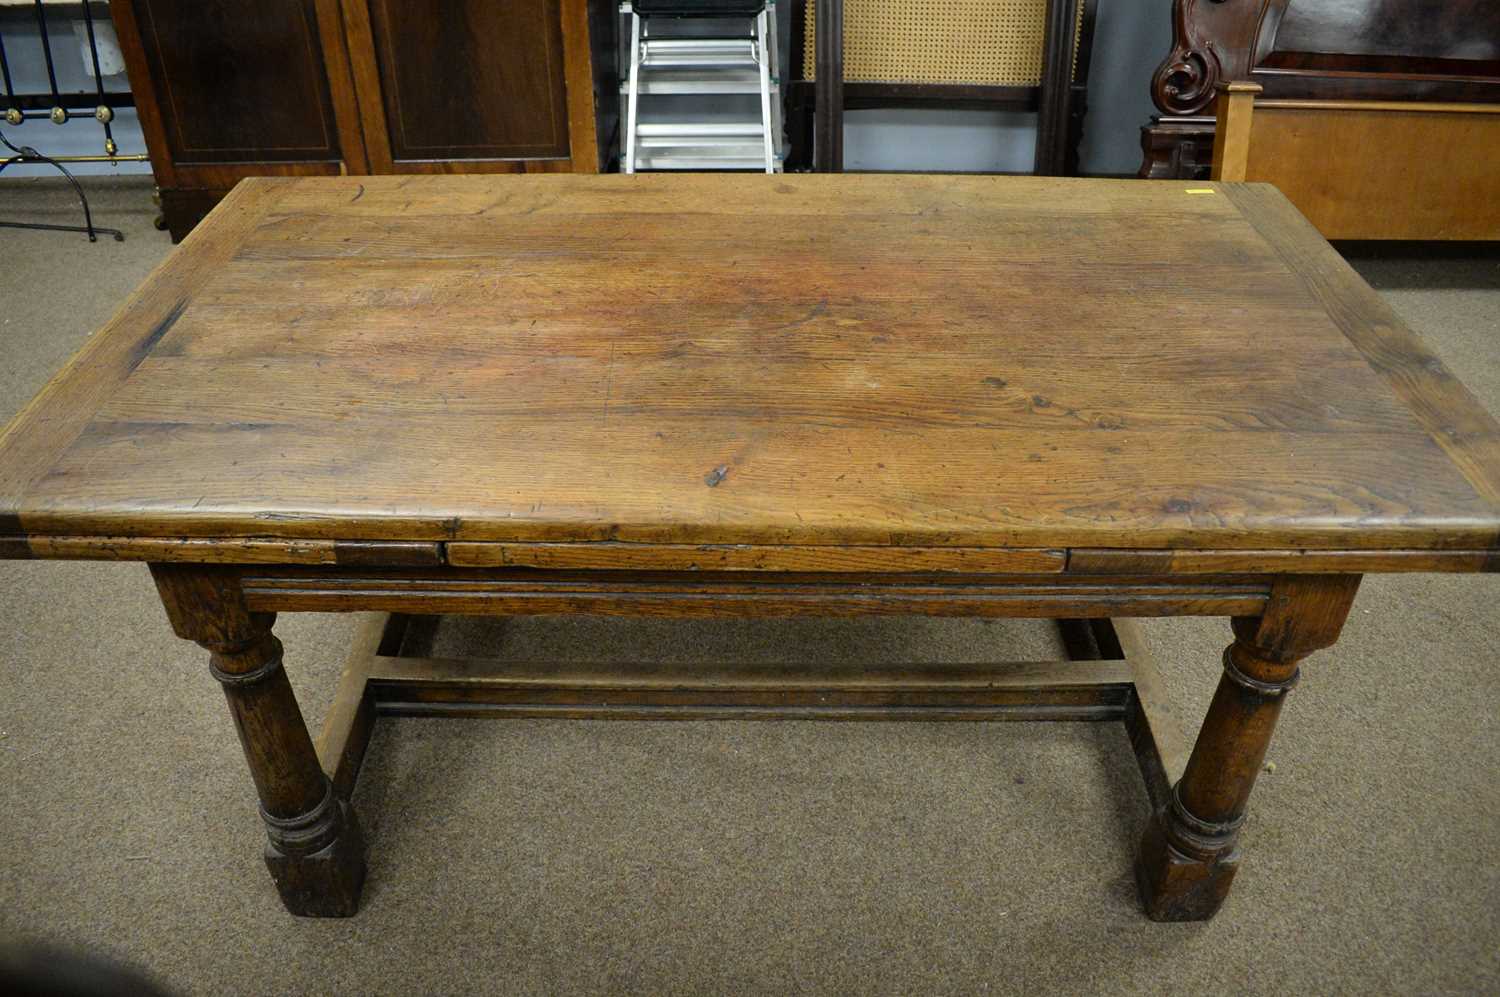 Lot 110 - Substantial 17th C style oak draw leaf dining table.